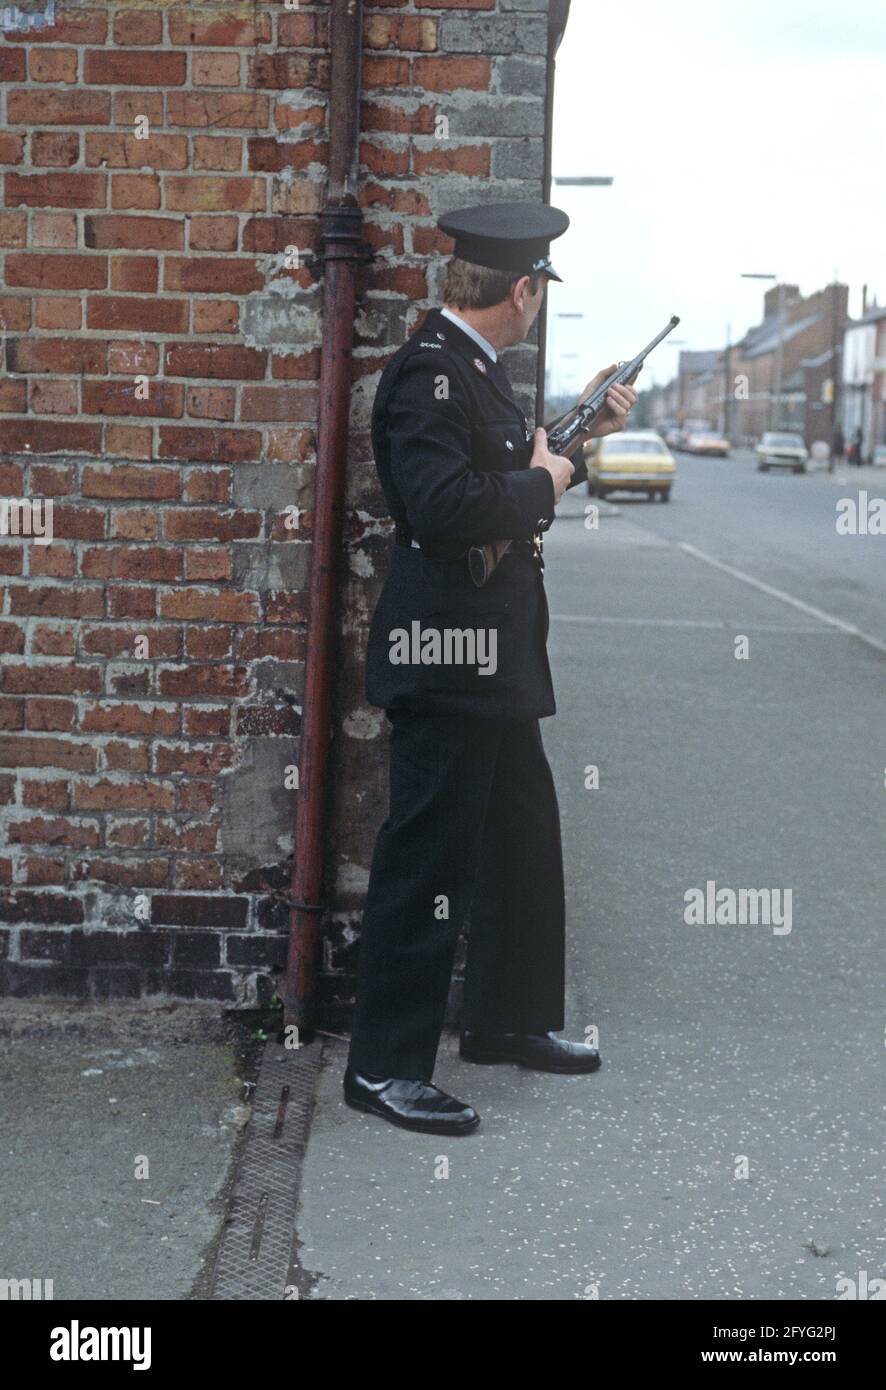 BELFAST, UNITED KINGDOM - SEPTEMBER 1978. RUC, Royal Ulster Constabulary, policeman on Patrol of East Belfast Streets during The Troubles, Northern Ireland, 1970s Stock Photo